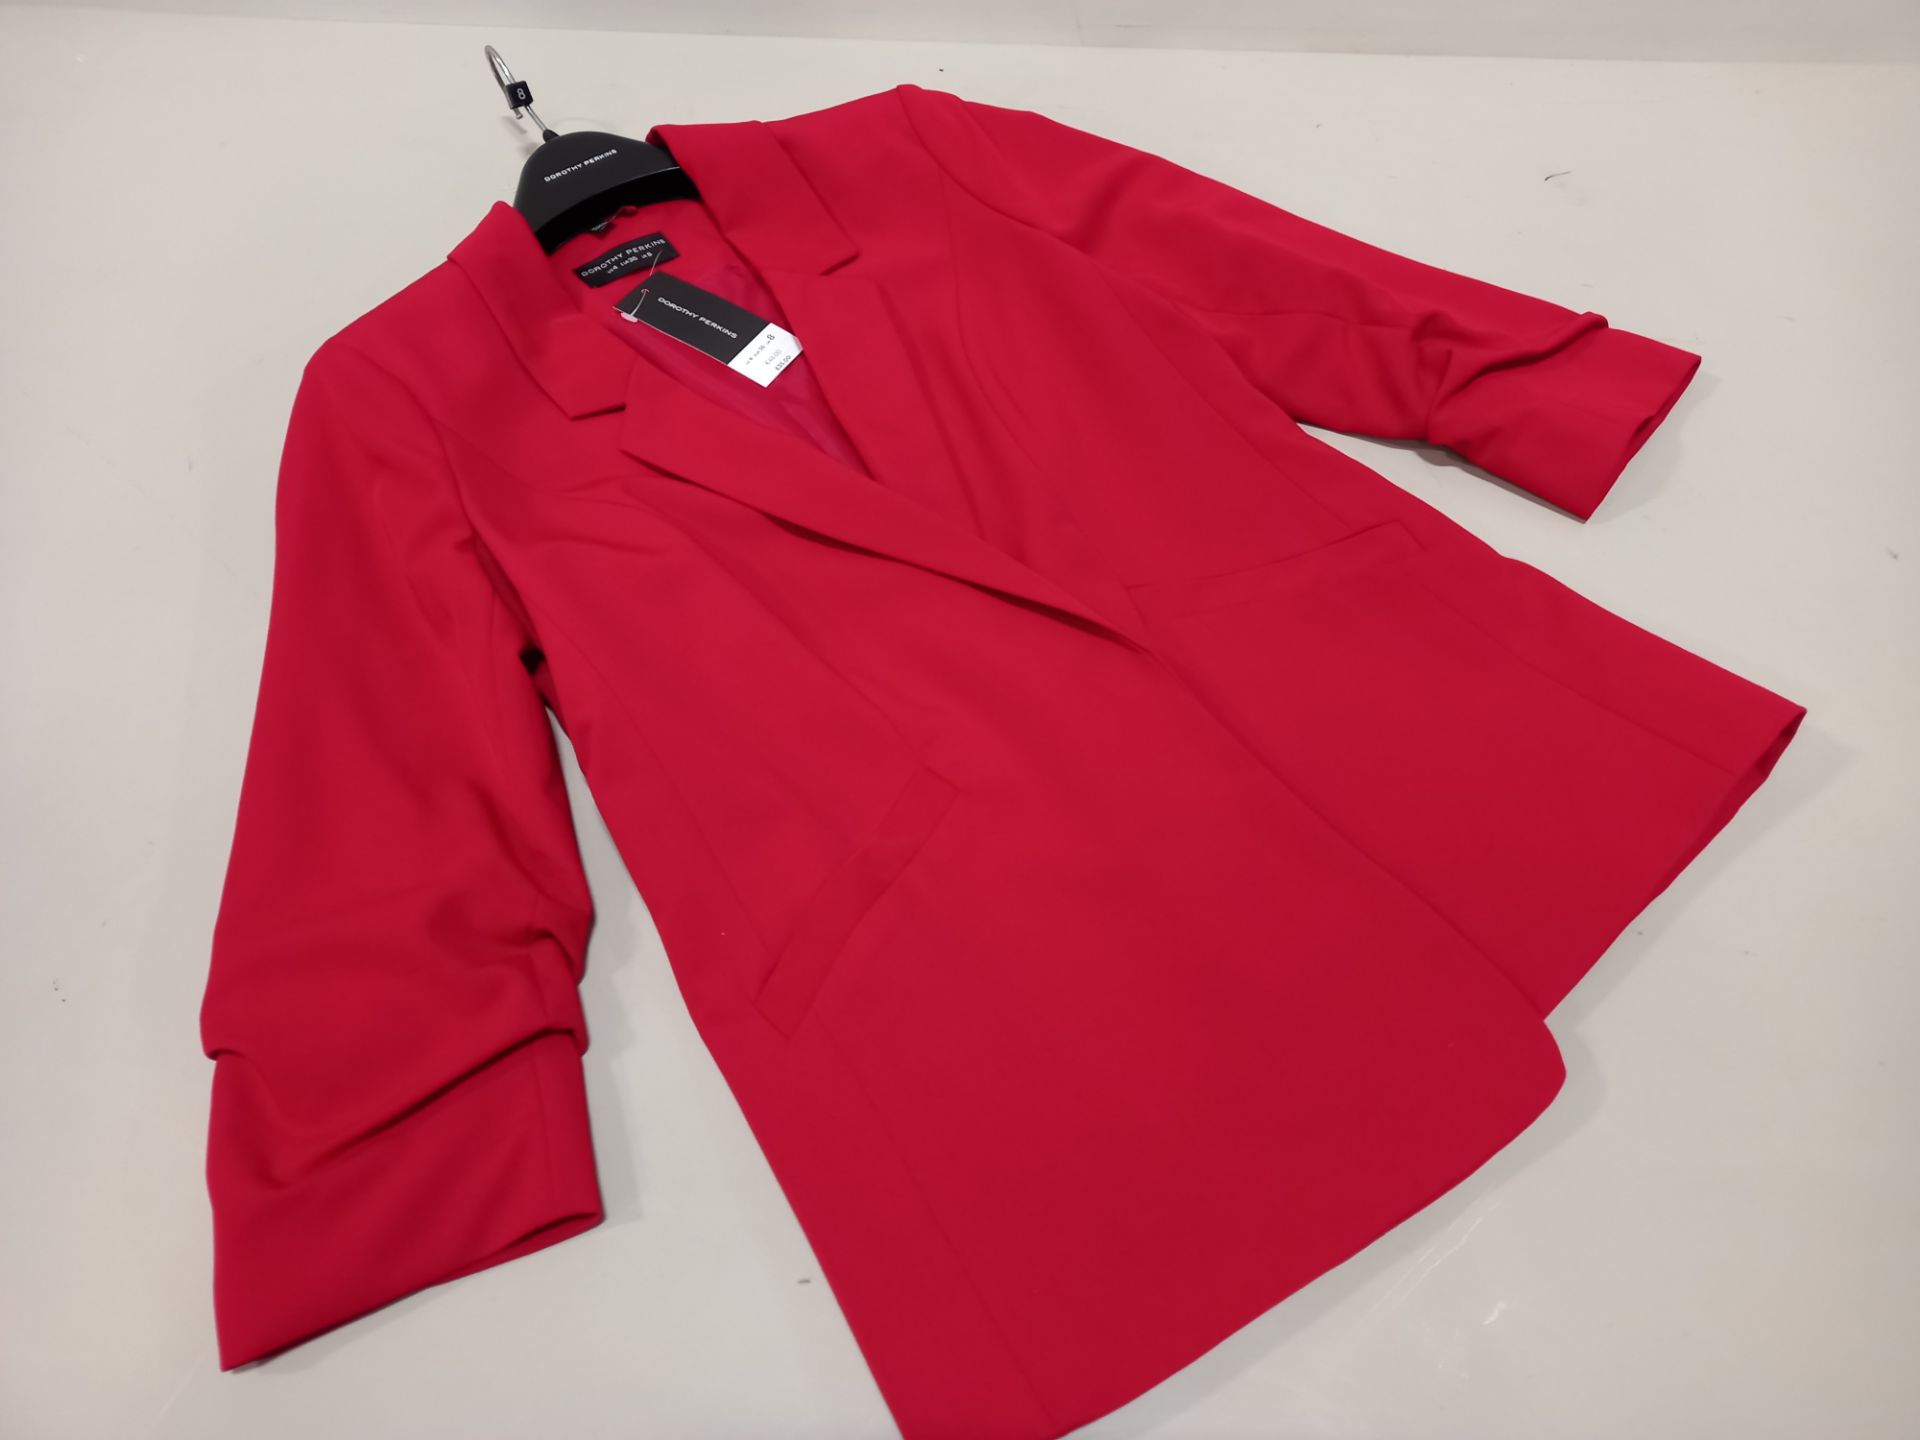 20 X DOROTHY PERKINS WOMEN'S RED JACKETS 3/4 LENGTH SLEEVES - SIZES 14s & 12s WITH TAGS - PICK LOOSE